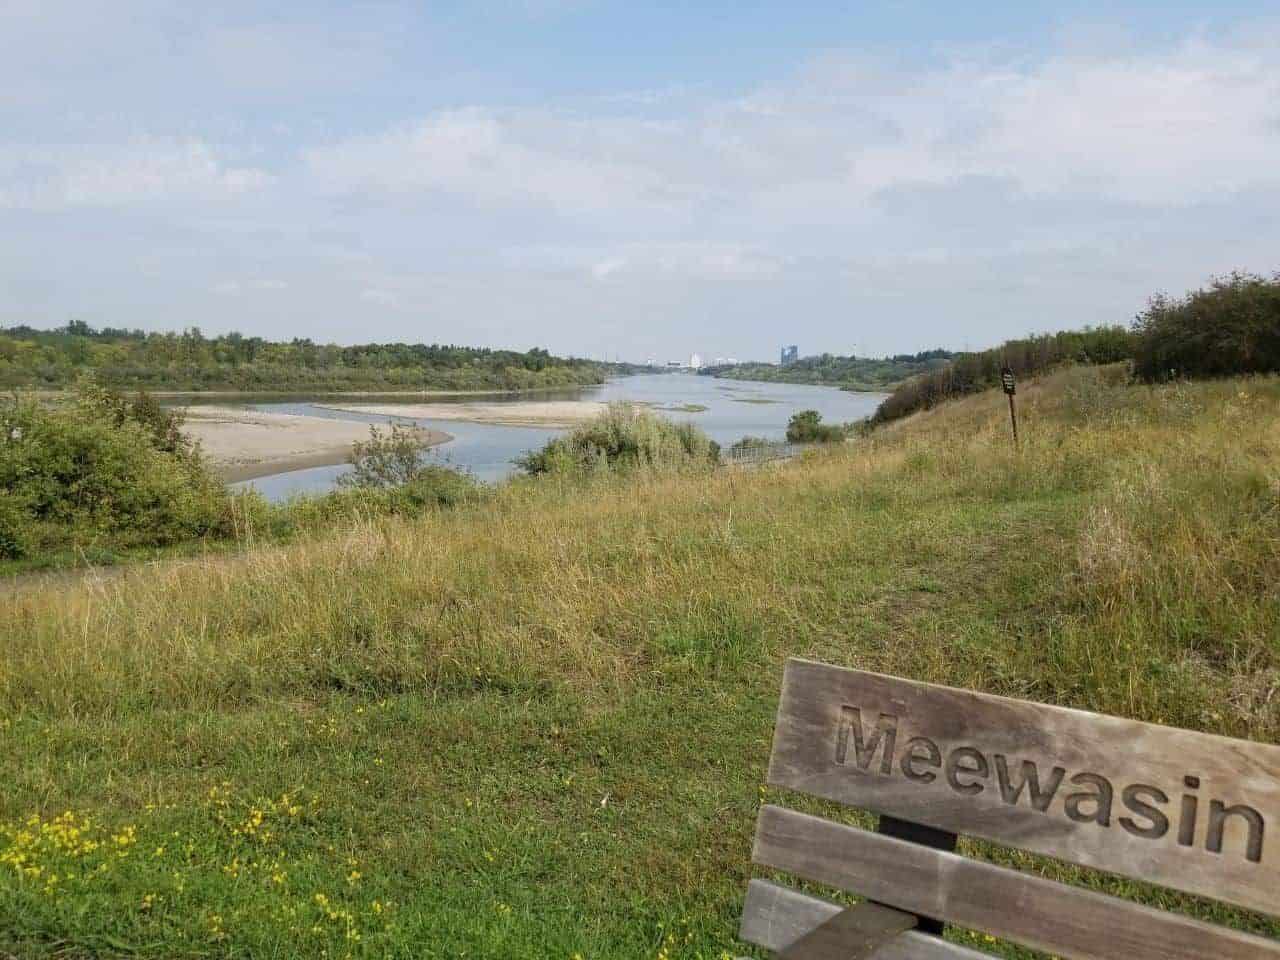 Meewasin Valley Trail follows the banks of the South Saskatchewan River for 105km